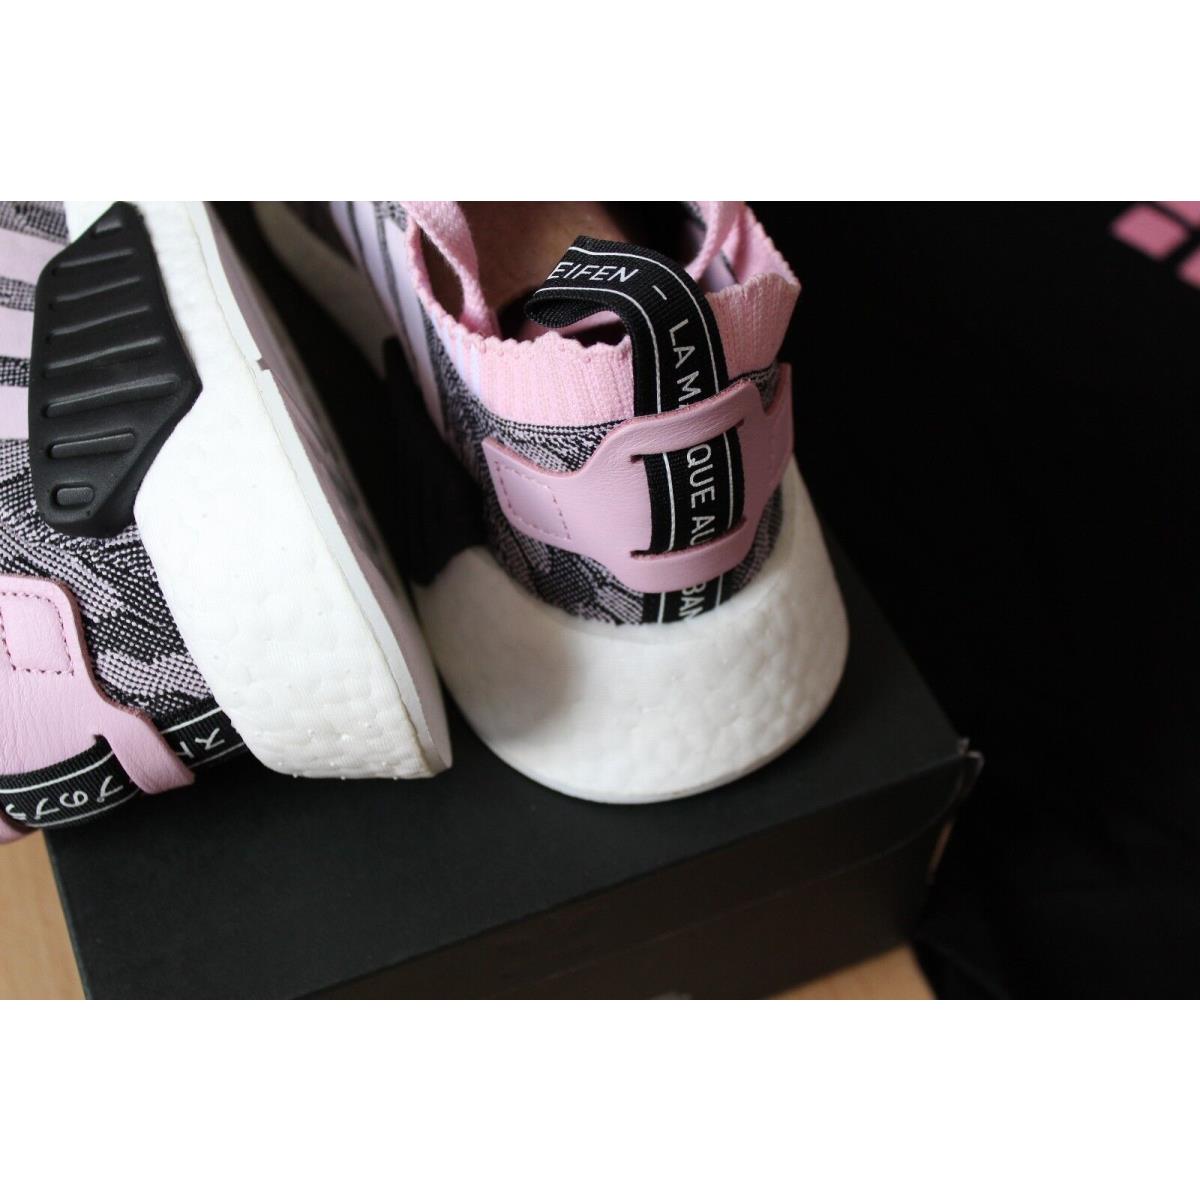 Adidas shoes NMD - PINK 3